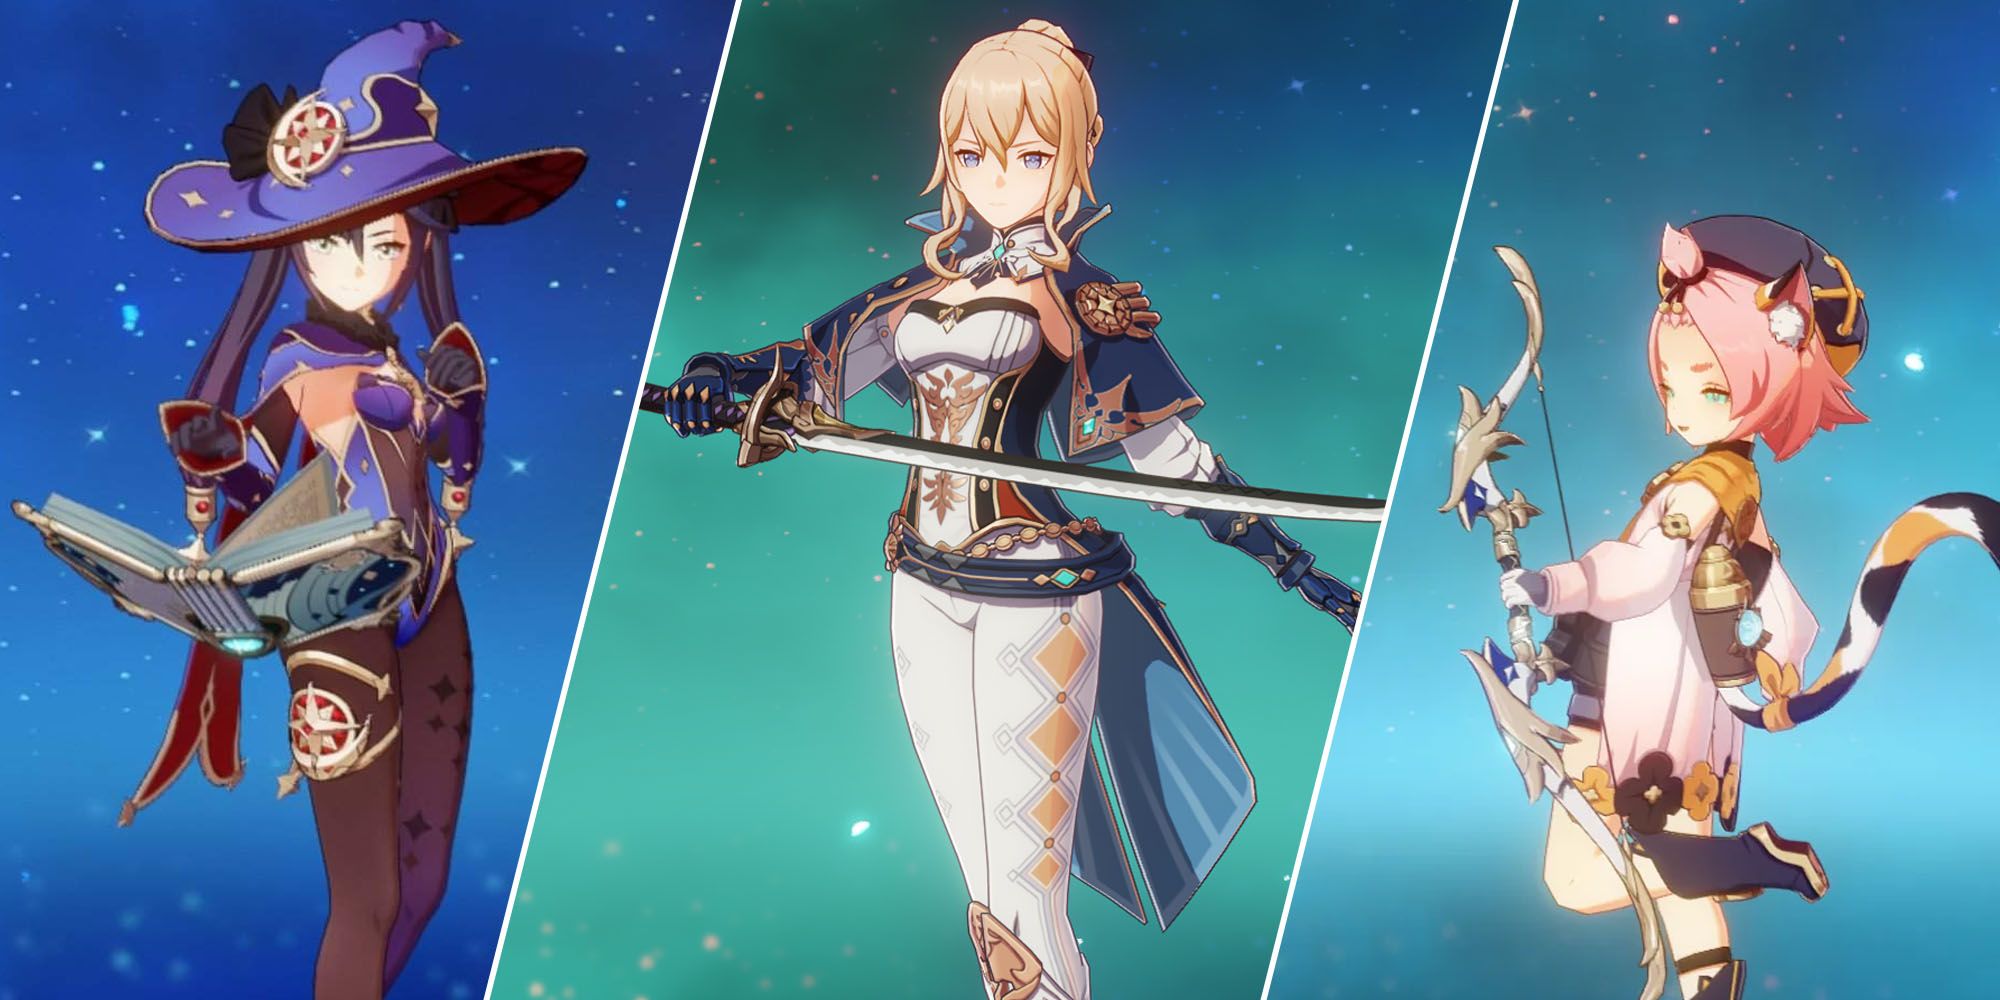 side by side photos of Mona with Widsith, Jean with Amenoma Kageuchi, and Diona with Favonius Warbow in Genshin Impact